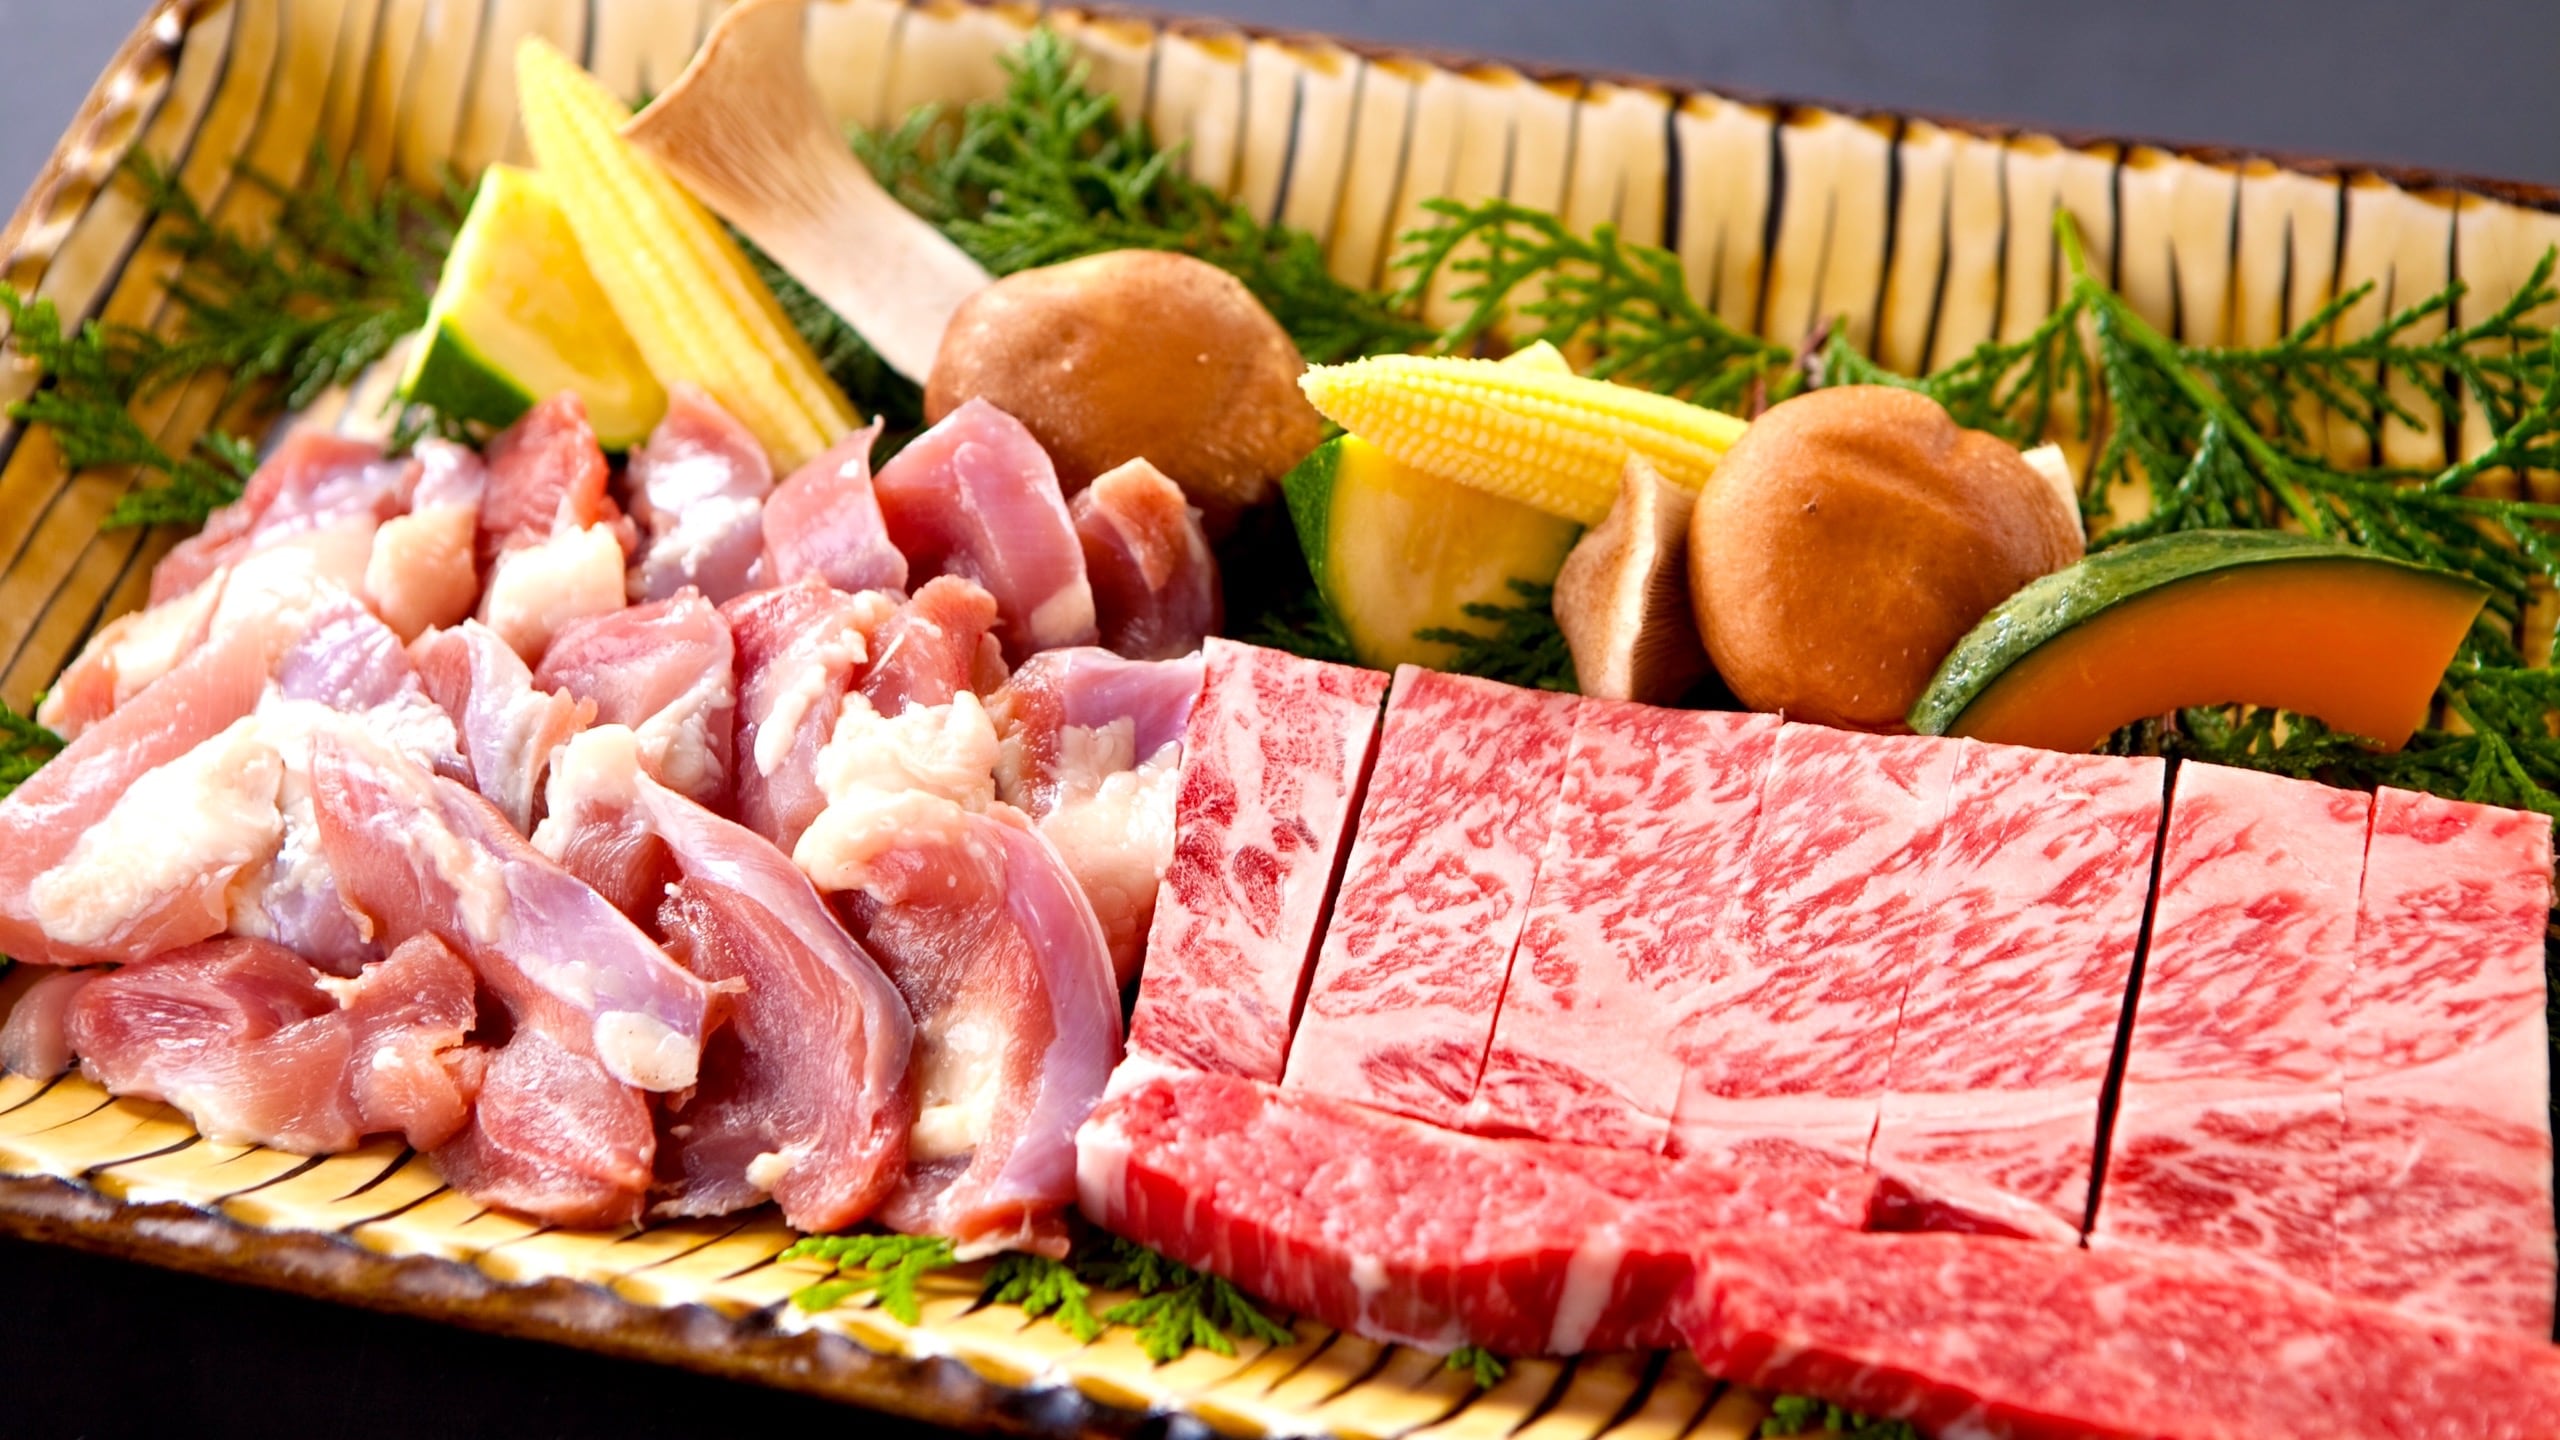 [Exquisite moment] Juwwa in your mouth! "Oita Wagyu" that melts in your mouth is exquisite